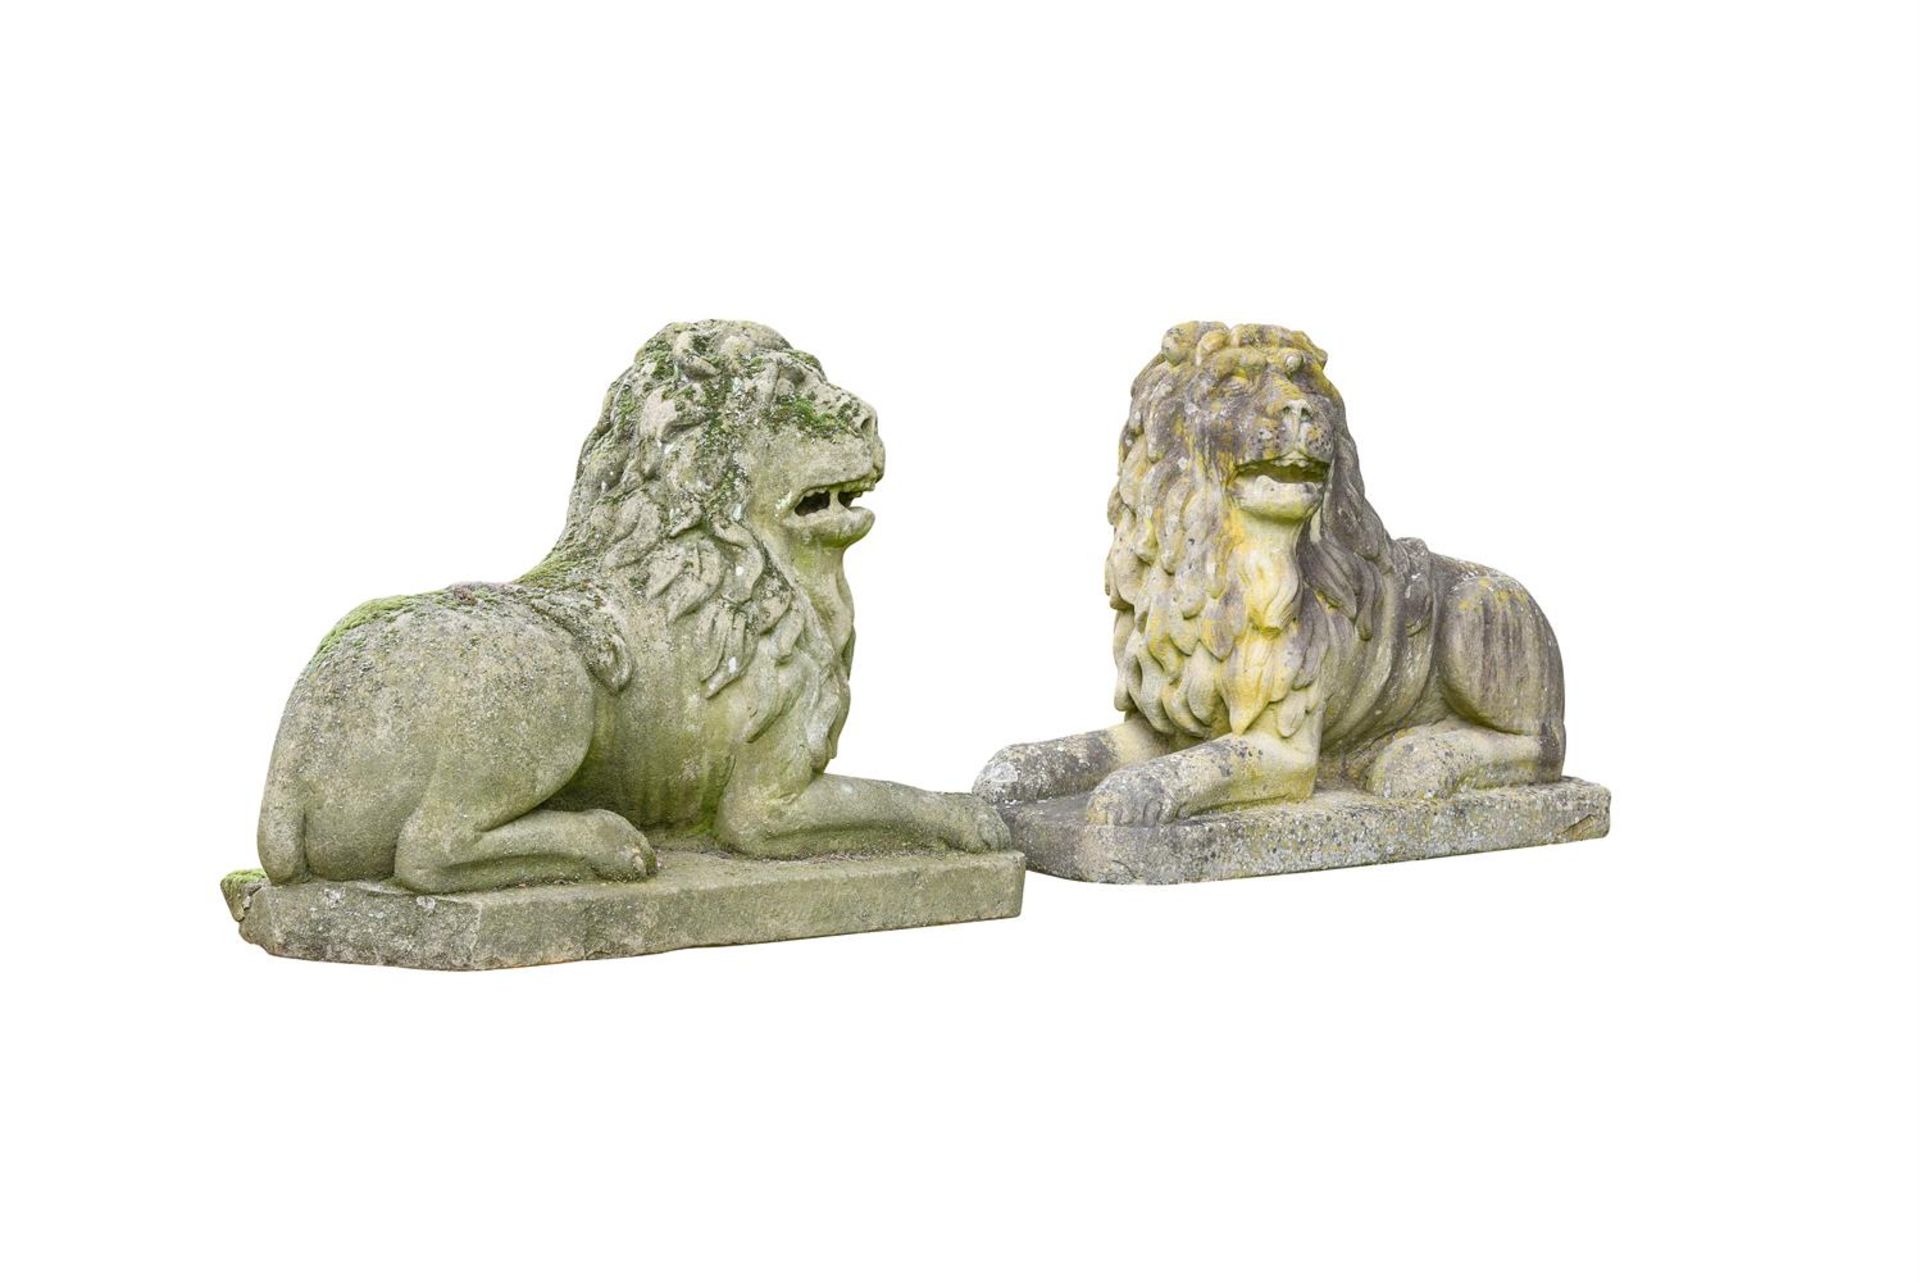 A PAIR OF ITALIAN CARVED STONE RECUMBENT LIONS, LATE 19TH CENTURY - Image 2 of 3